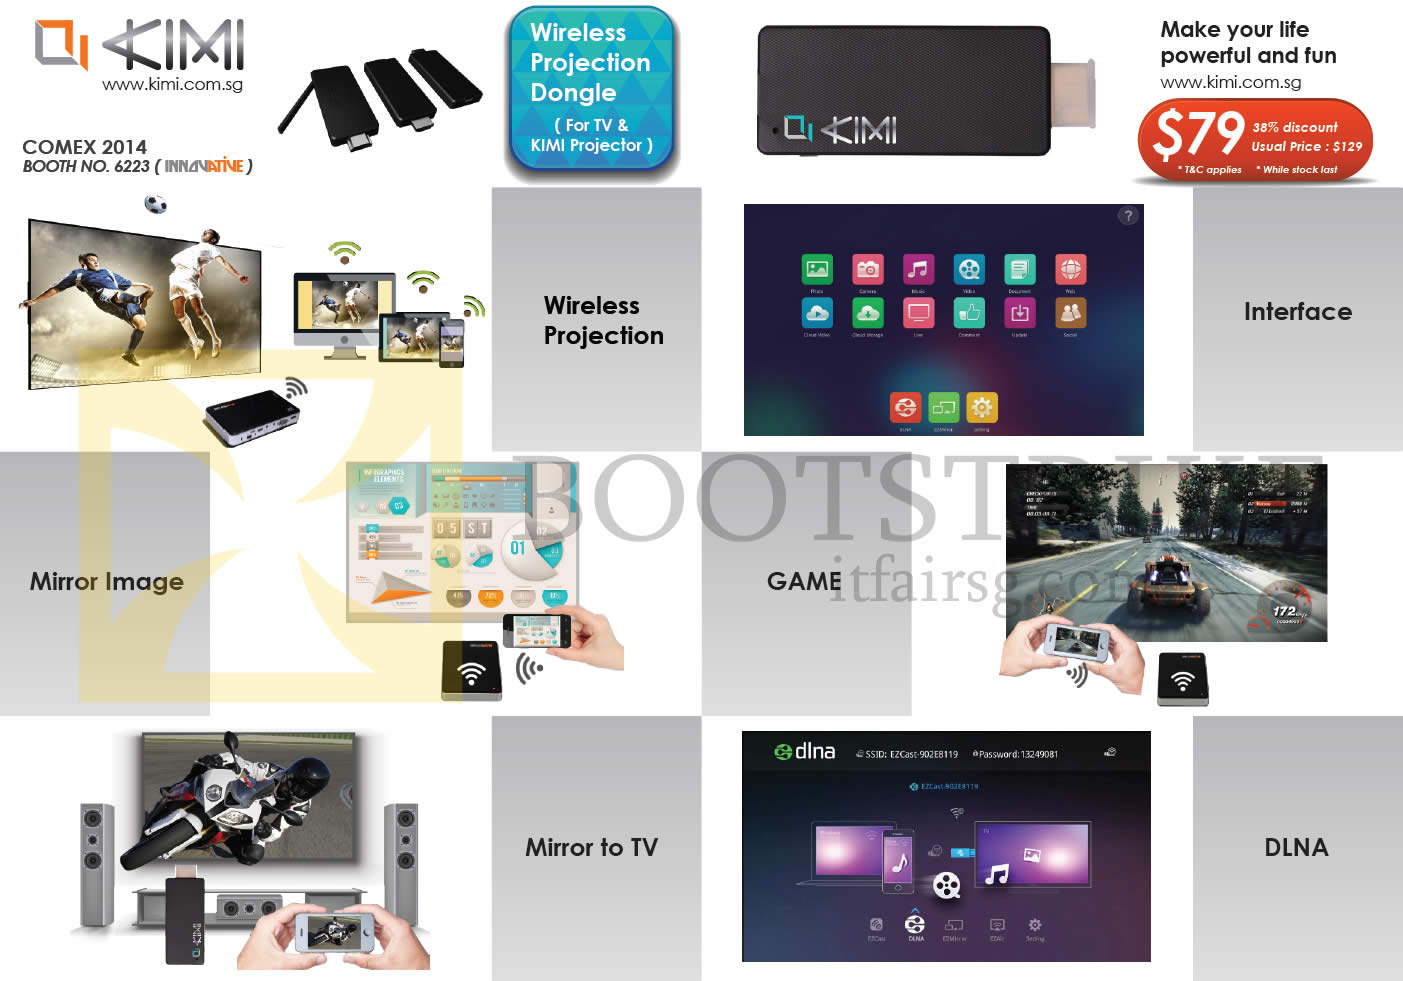 COMEX 2014 price list image brochure of Innovative Kimi Wireless Projection Dongle